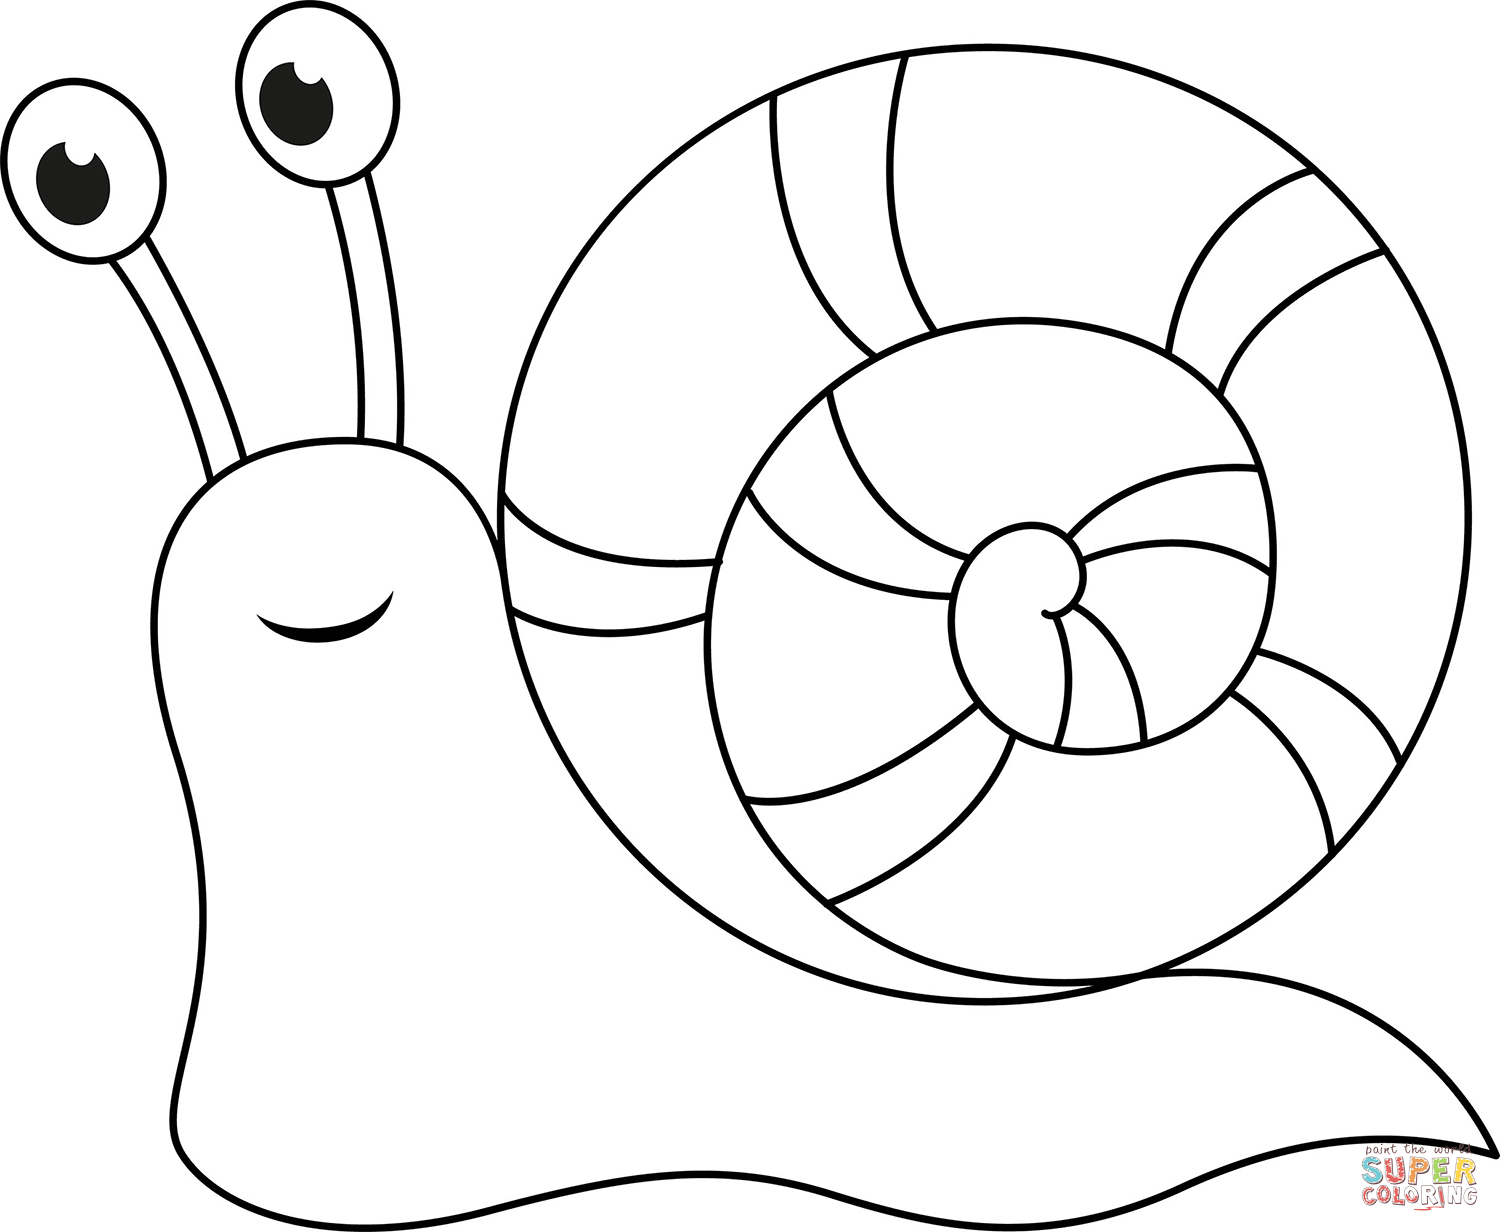 Cute snail coloring page free printable coloring pages